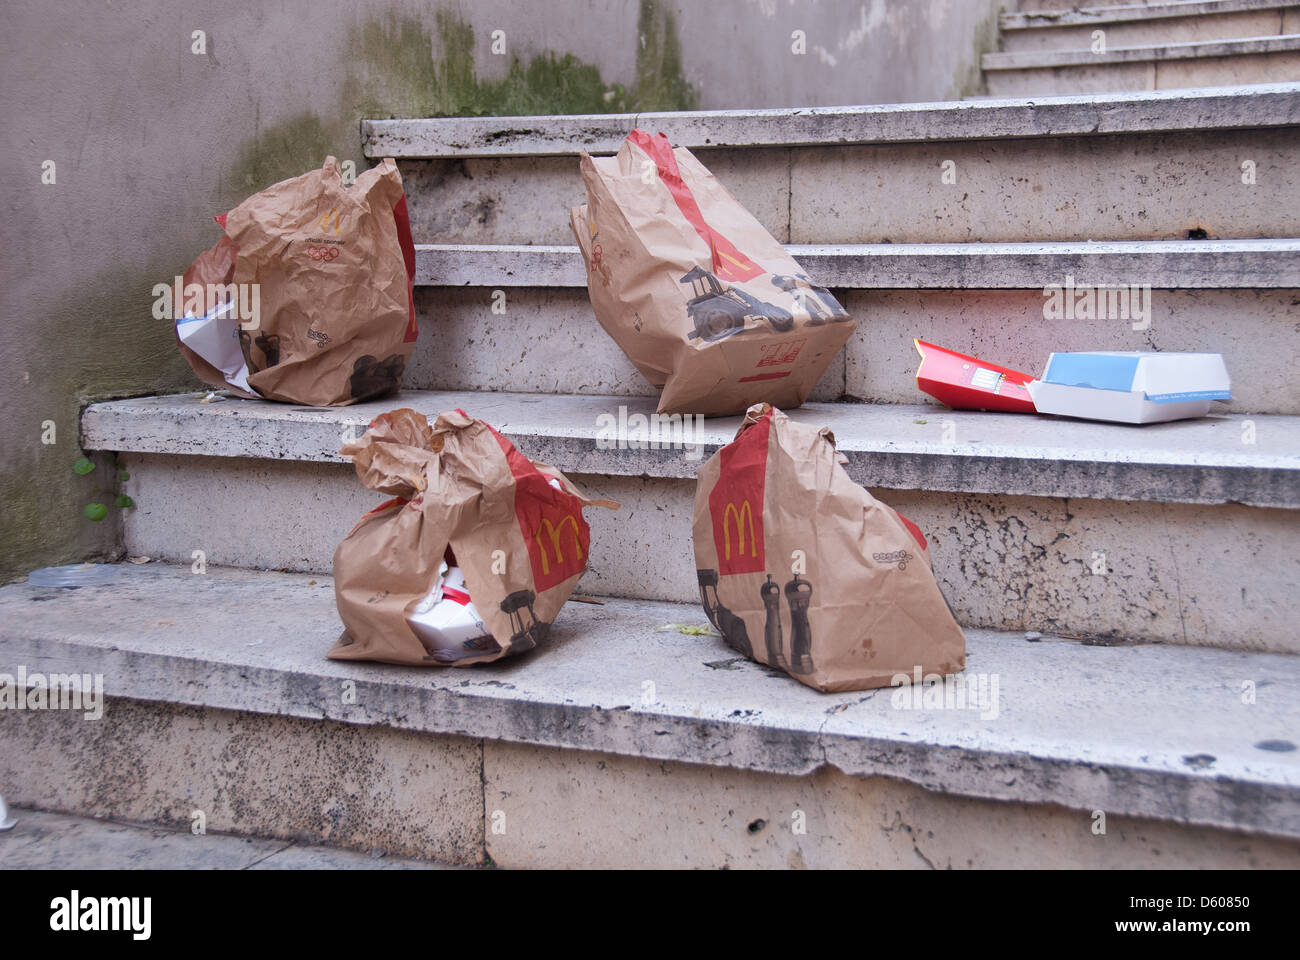 Fast food packaging left in the street. 2013. Stock Photo